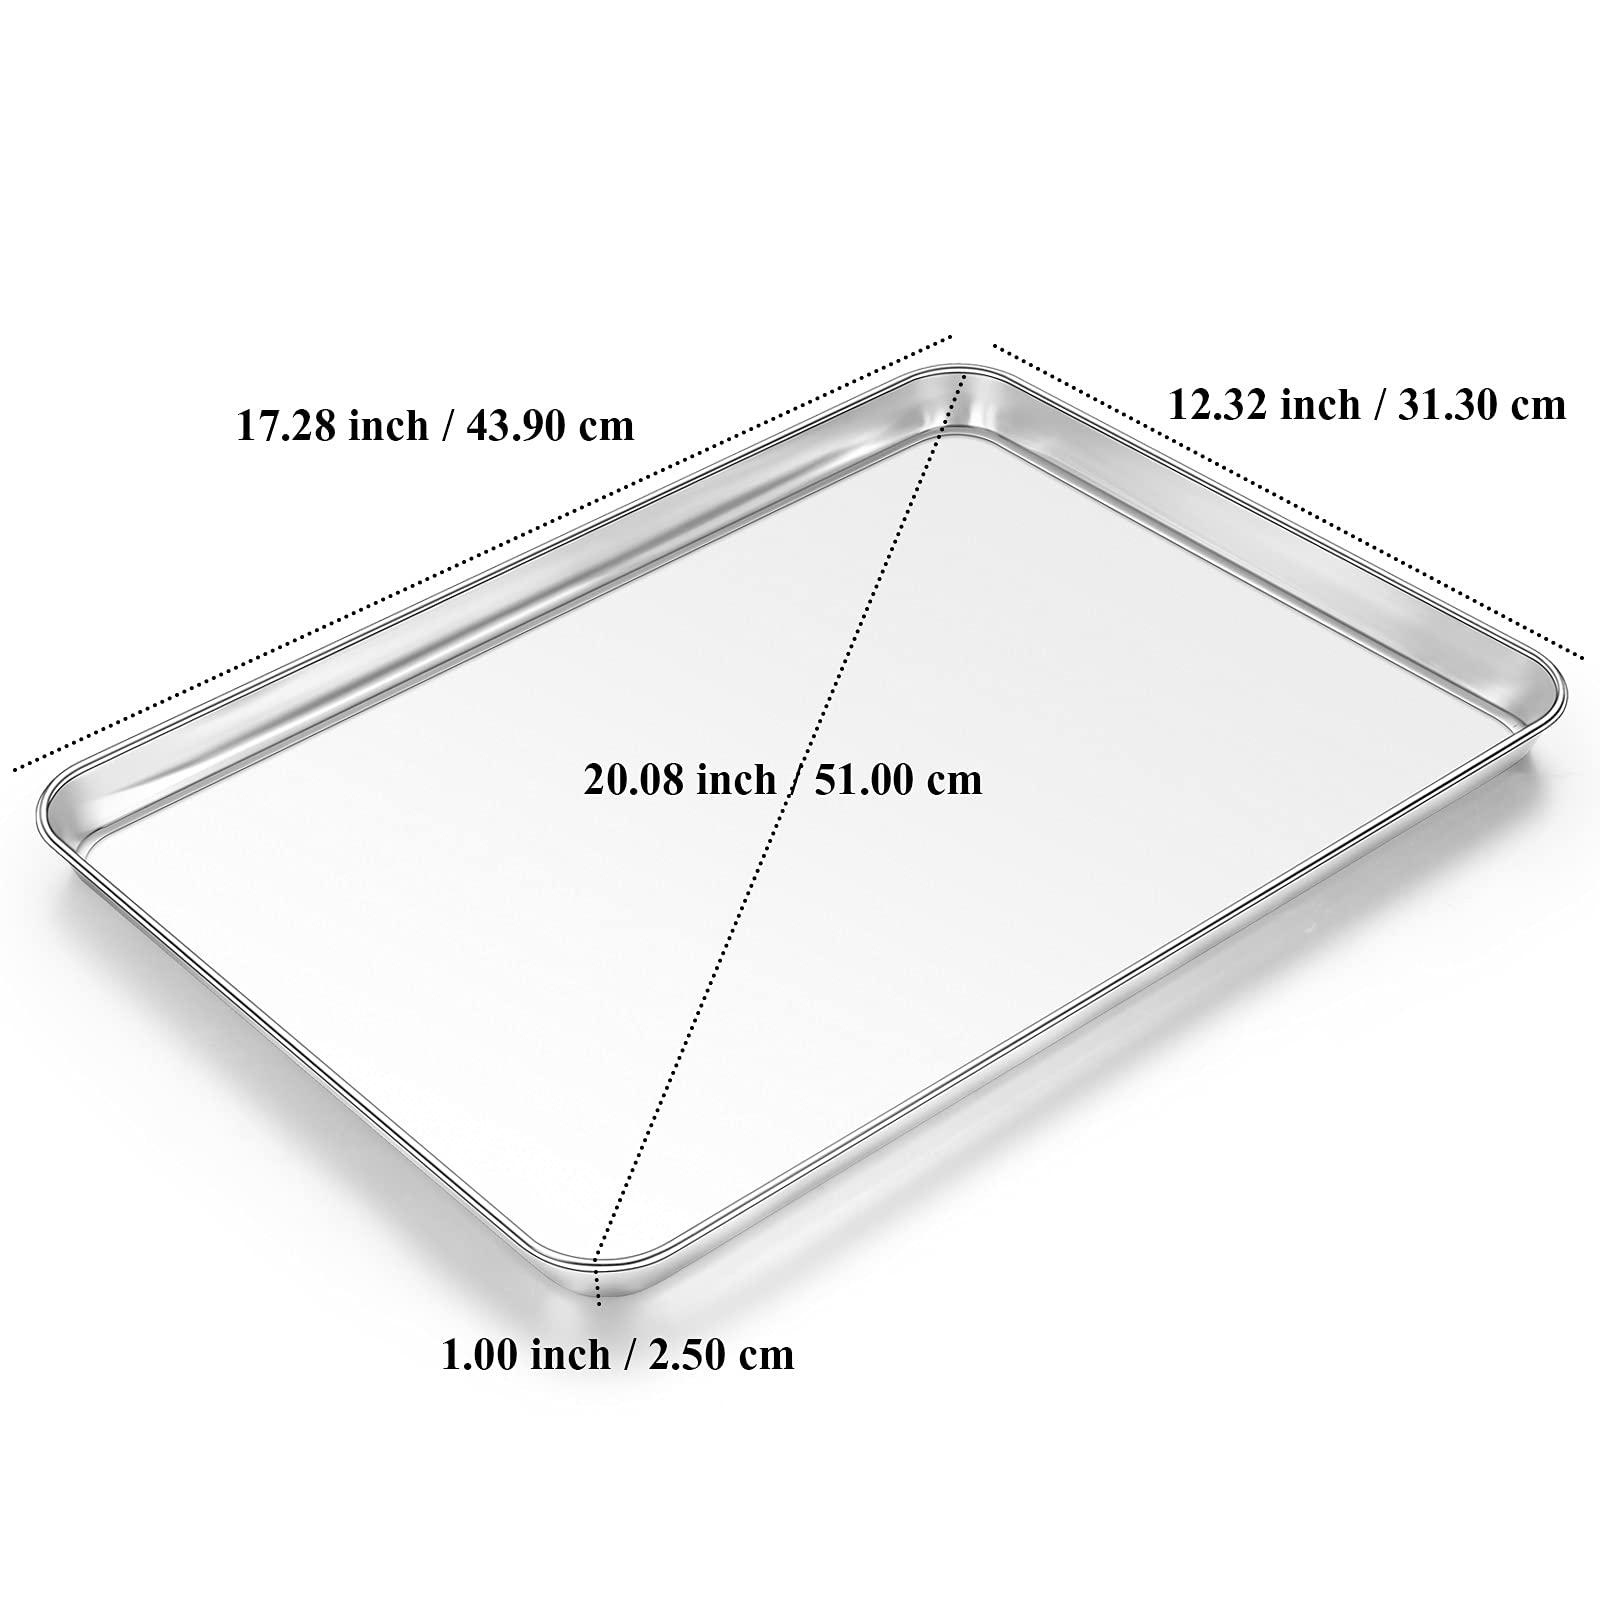 Yododo baking sheet with silicone mat set, yododo set of 4 (2 sheets + 2 mats), stainless steel cookie sheet baking pan tray with si